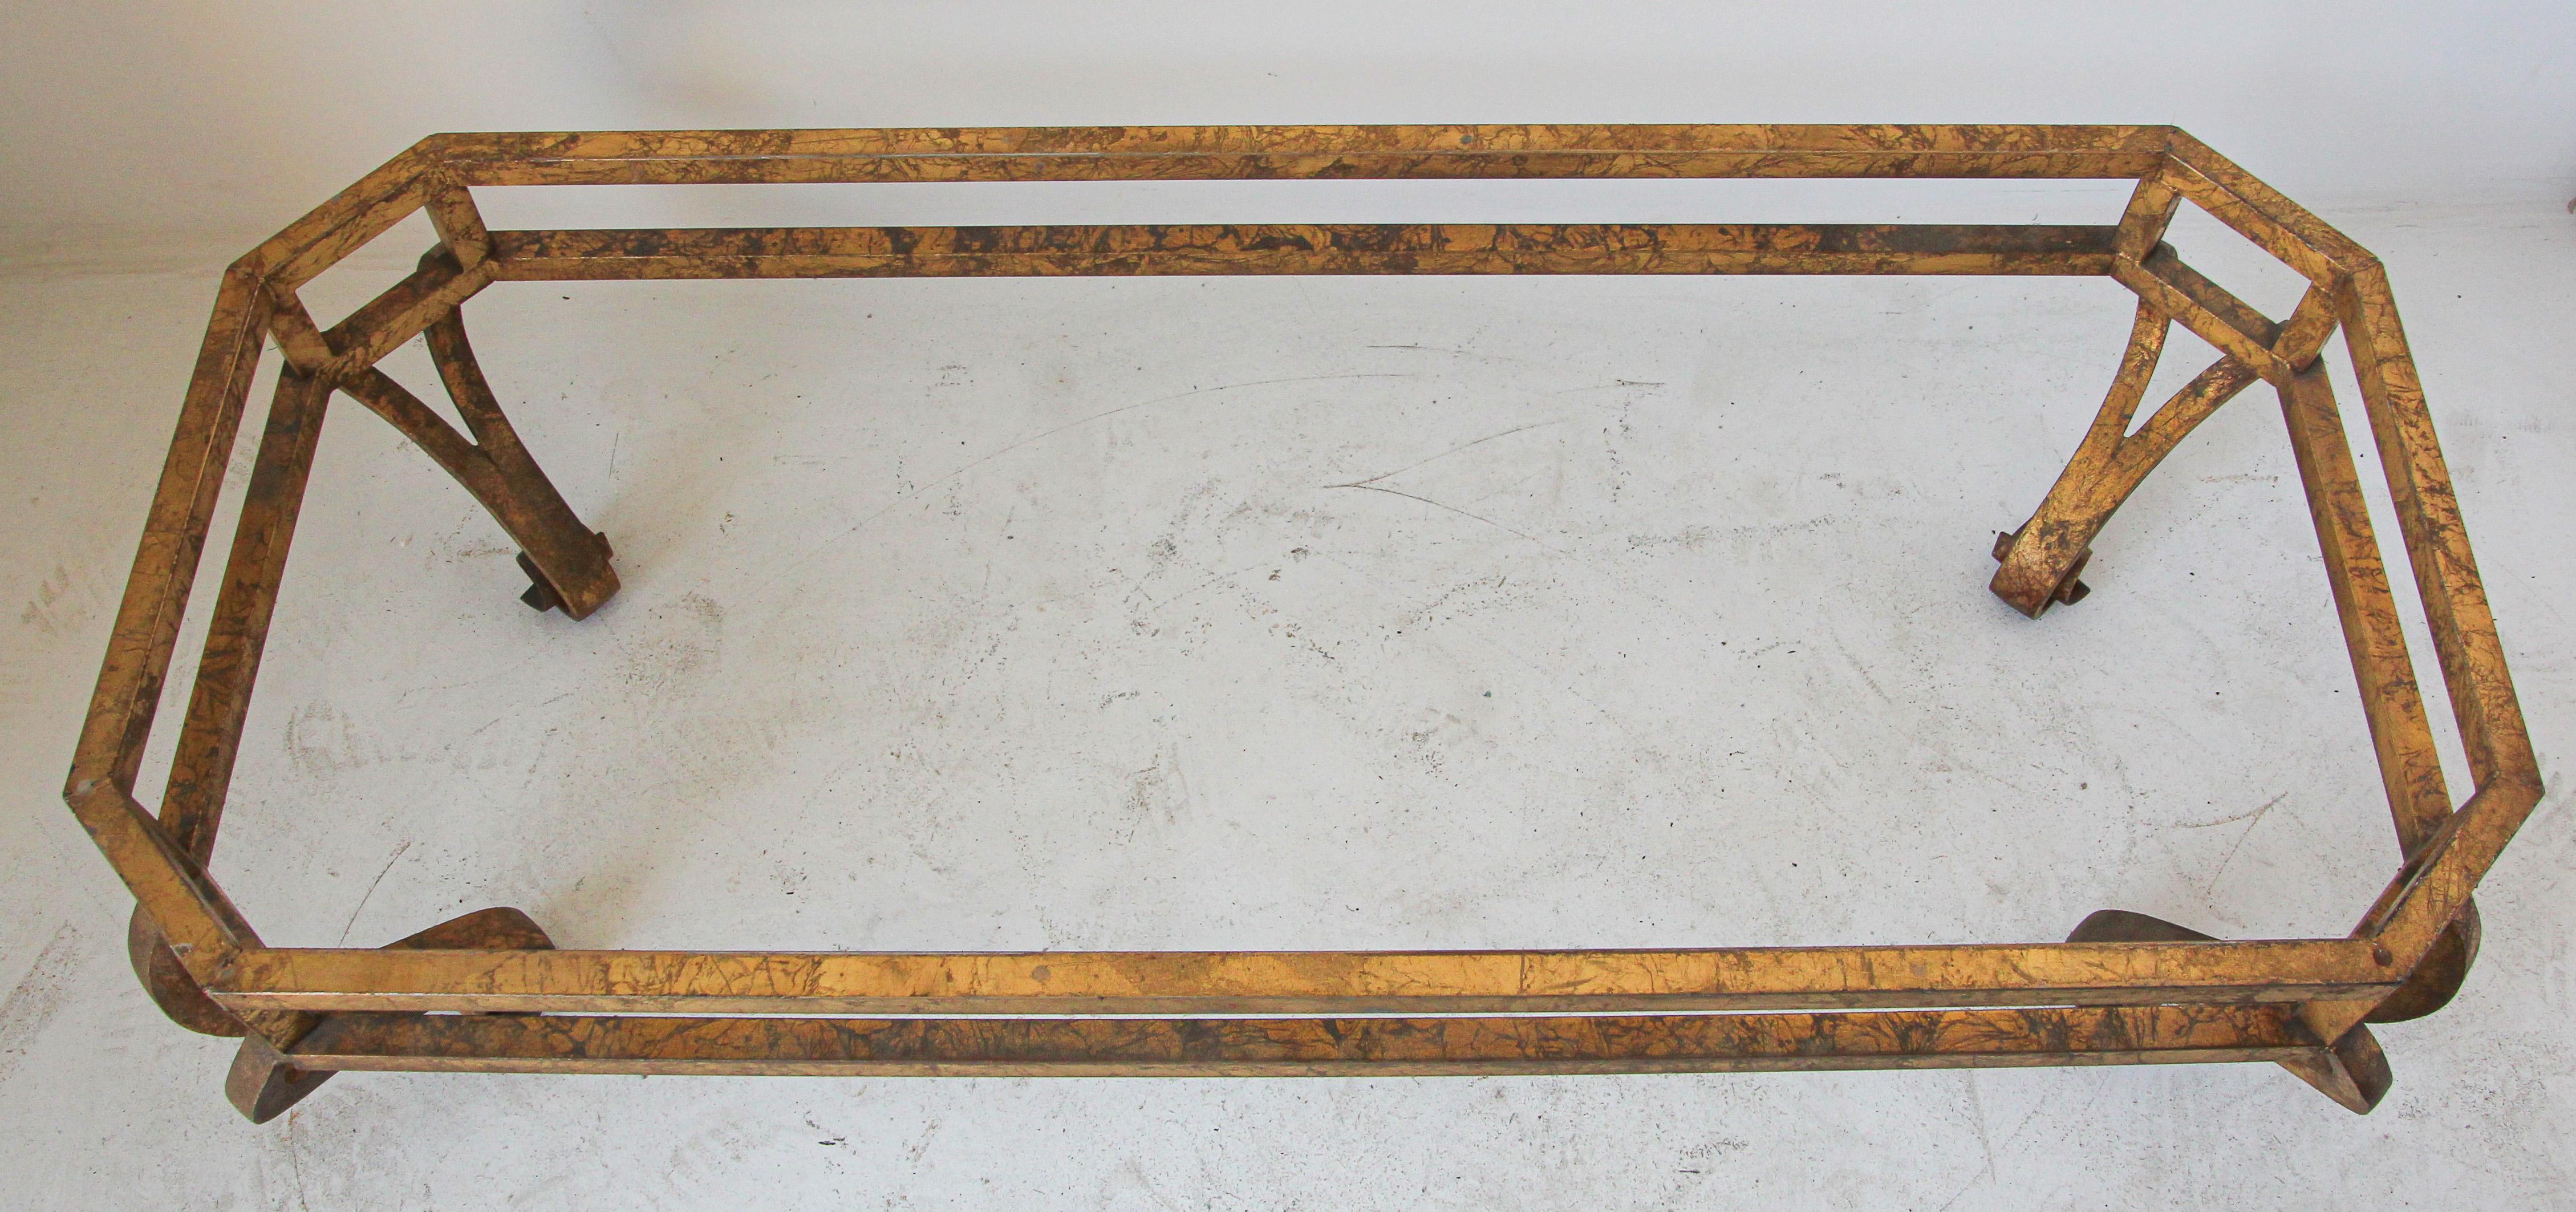 Vintage Wrought Gilt Iron Coffee Table Base Rectangular Shape Arturo Pani Style In Fair Condition For Sale In North Hollywood, CA